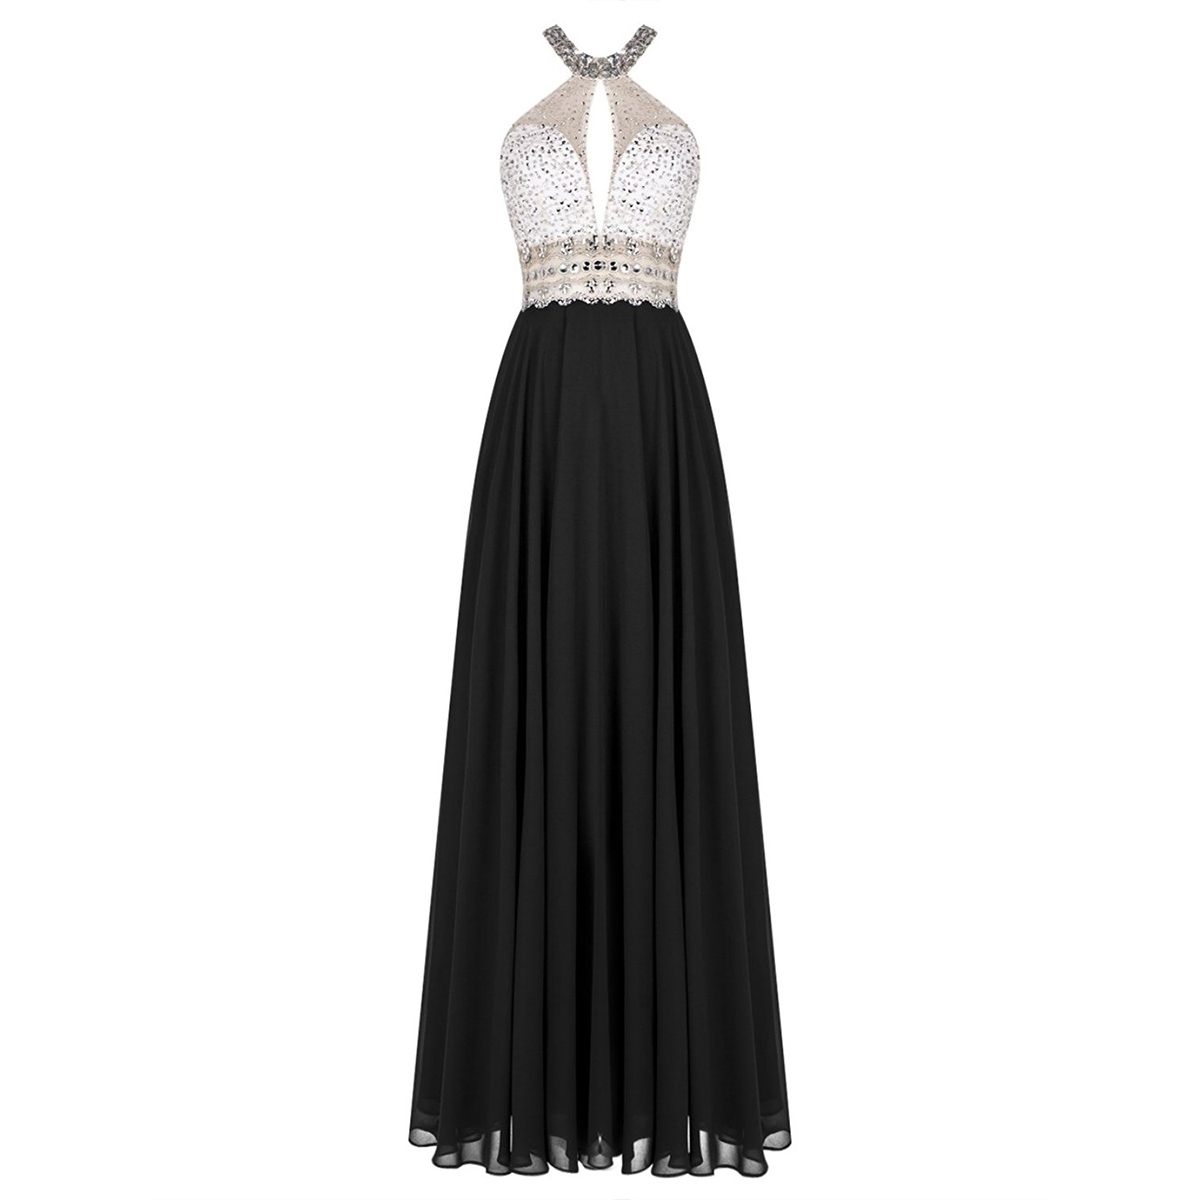 Beaded Embellished High Halter Neck Black Chiffon Floor Length A-line Bridesmaid Dress Featuring Open Back